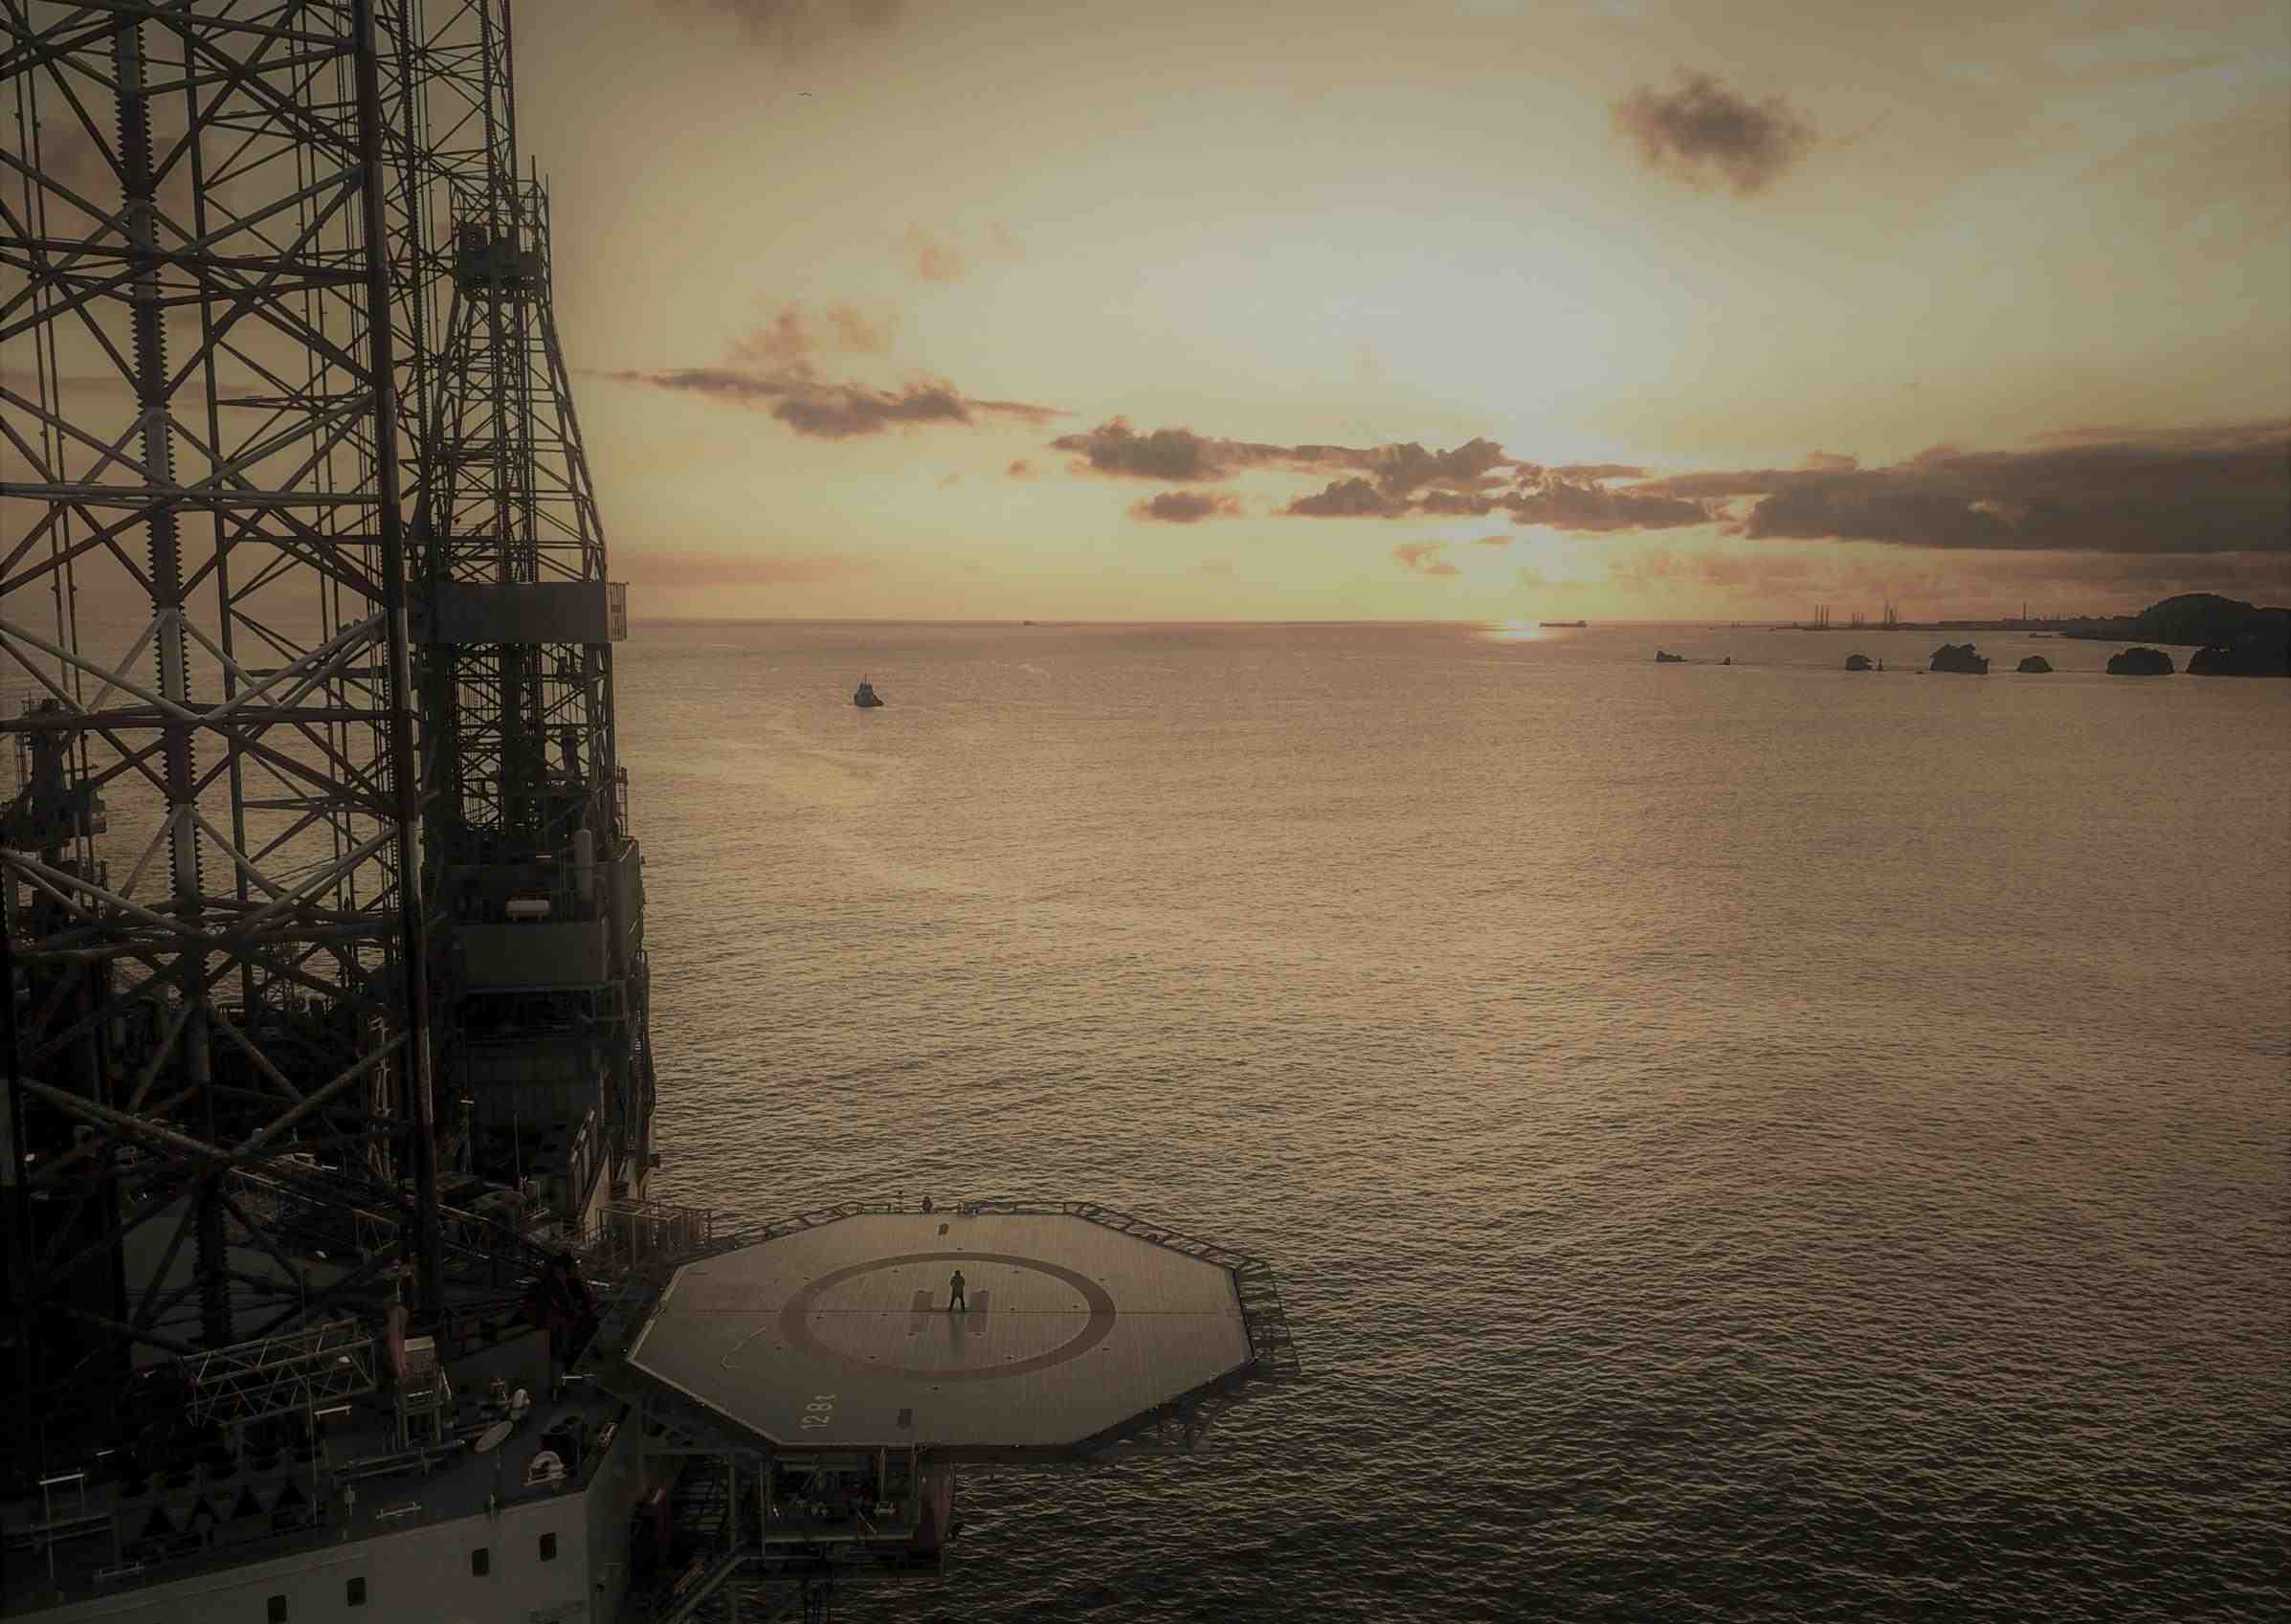 Borr Drilling keeping busy as rigs head to new assignments - Offshore Energy